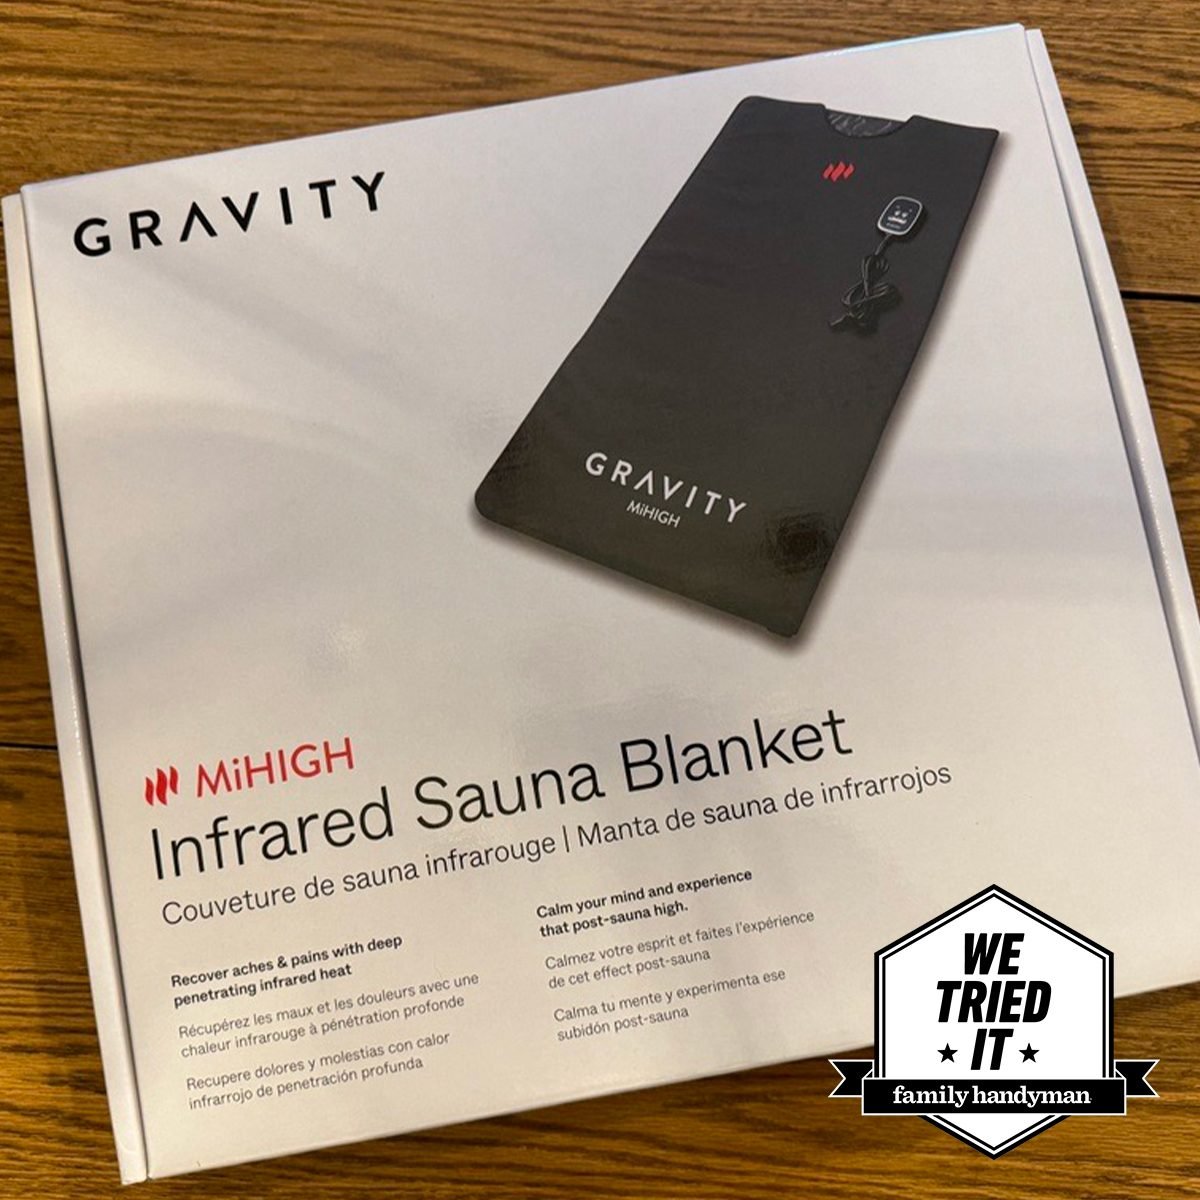 We Tried the MiHIGH Sauna Blanket, and It Creates a Relaxing, Warm Cocoon